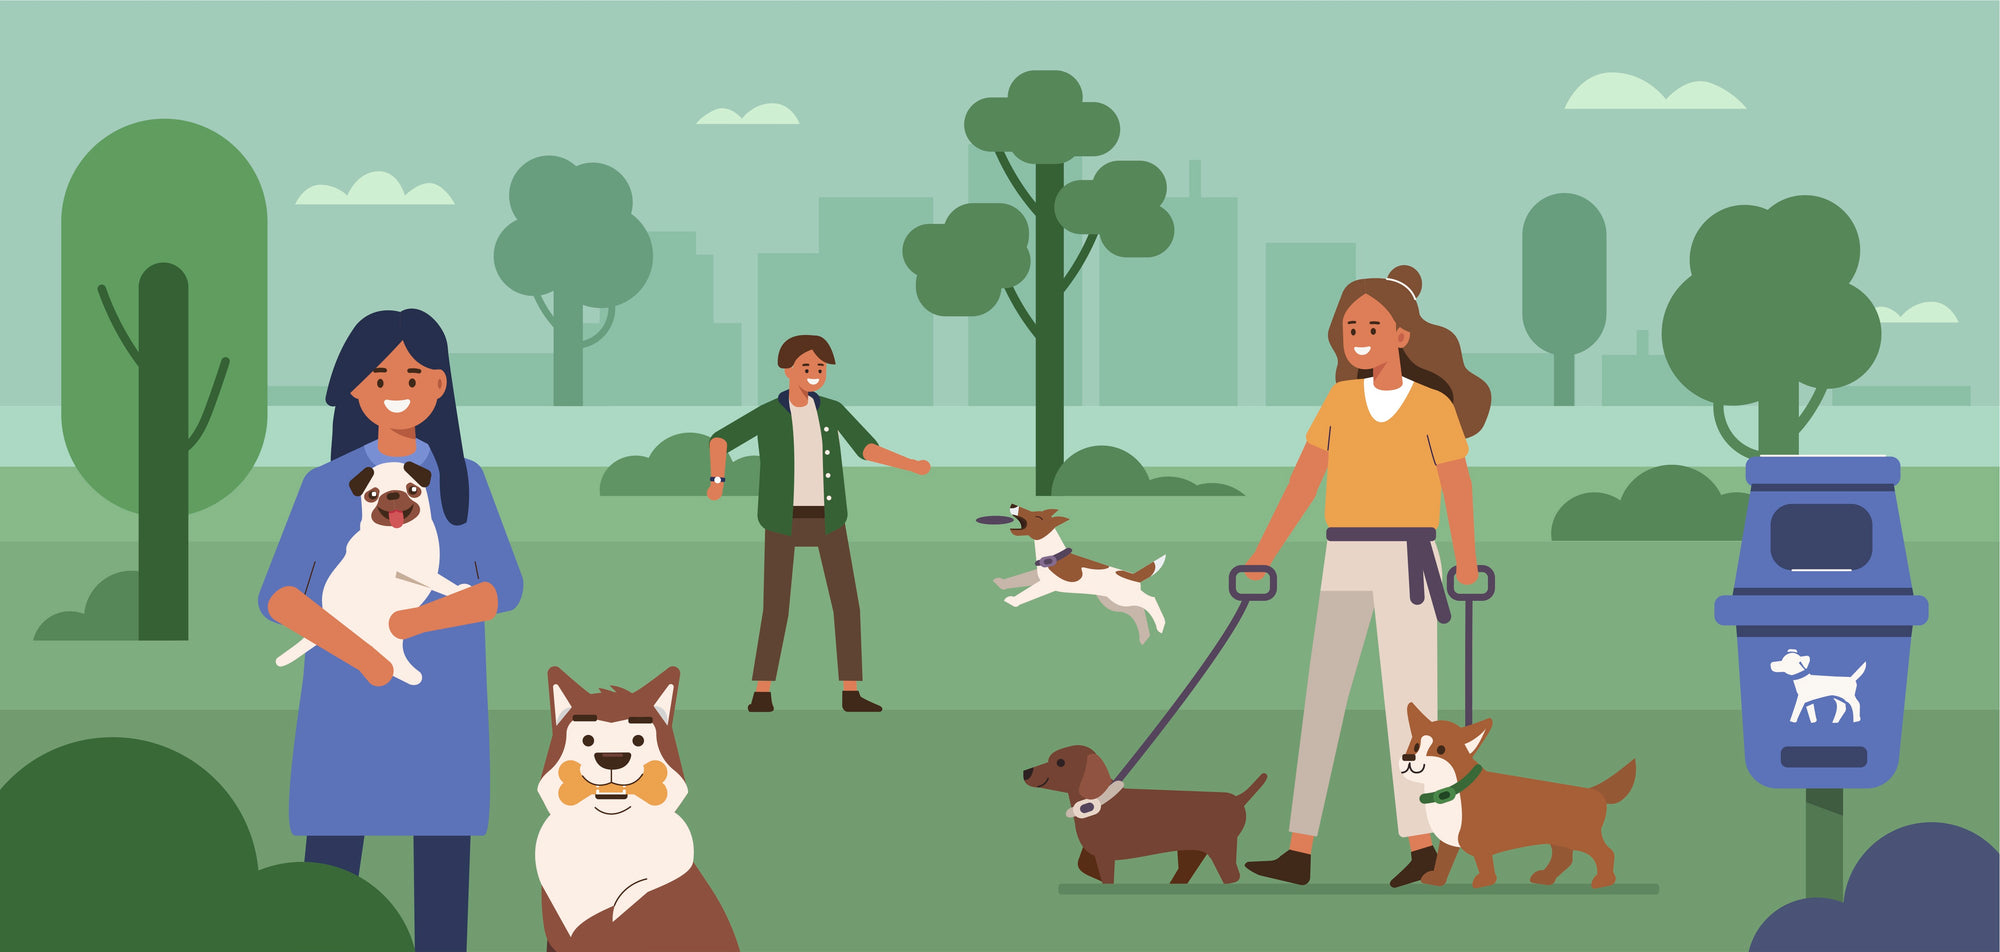 A woman walking dogs with a man and a cartoon dog holding a bone.